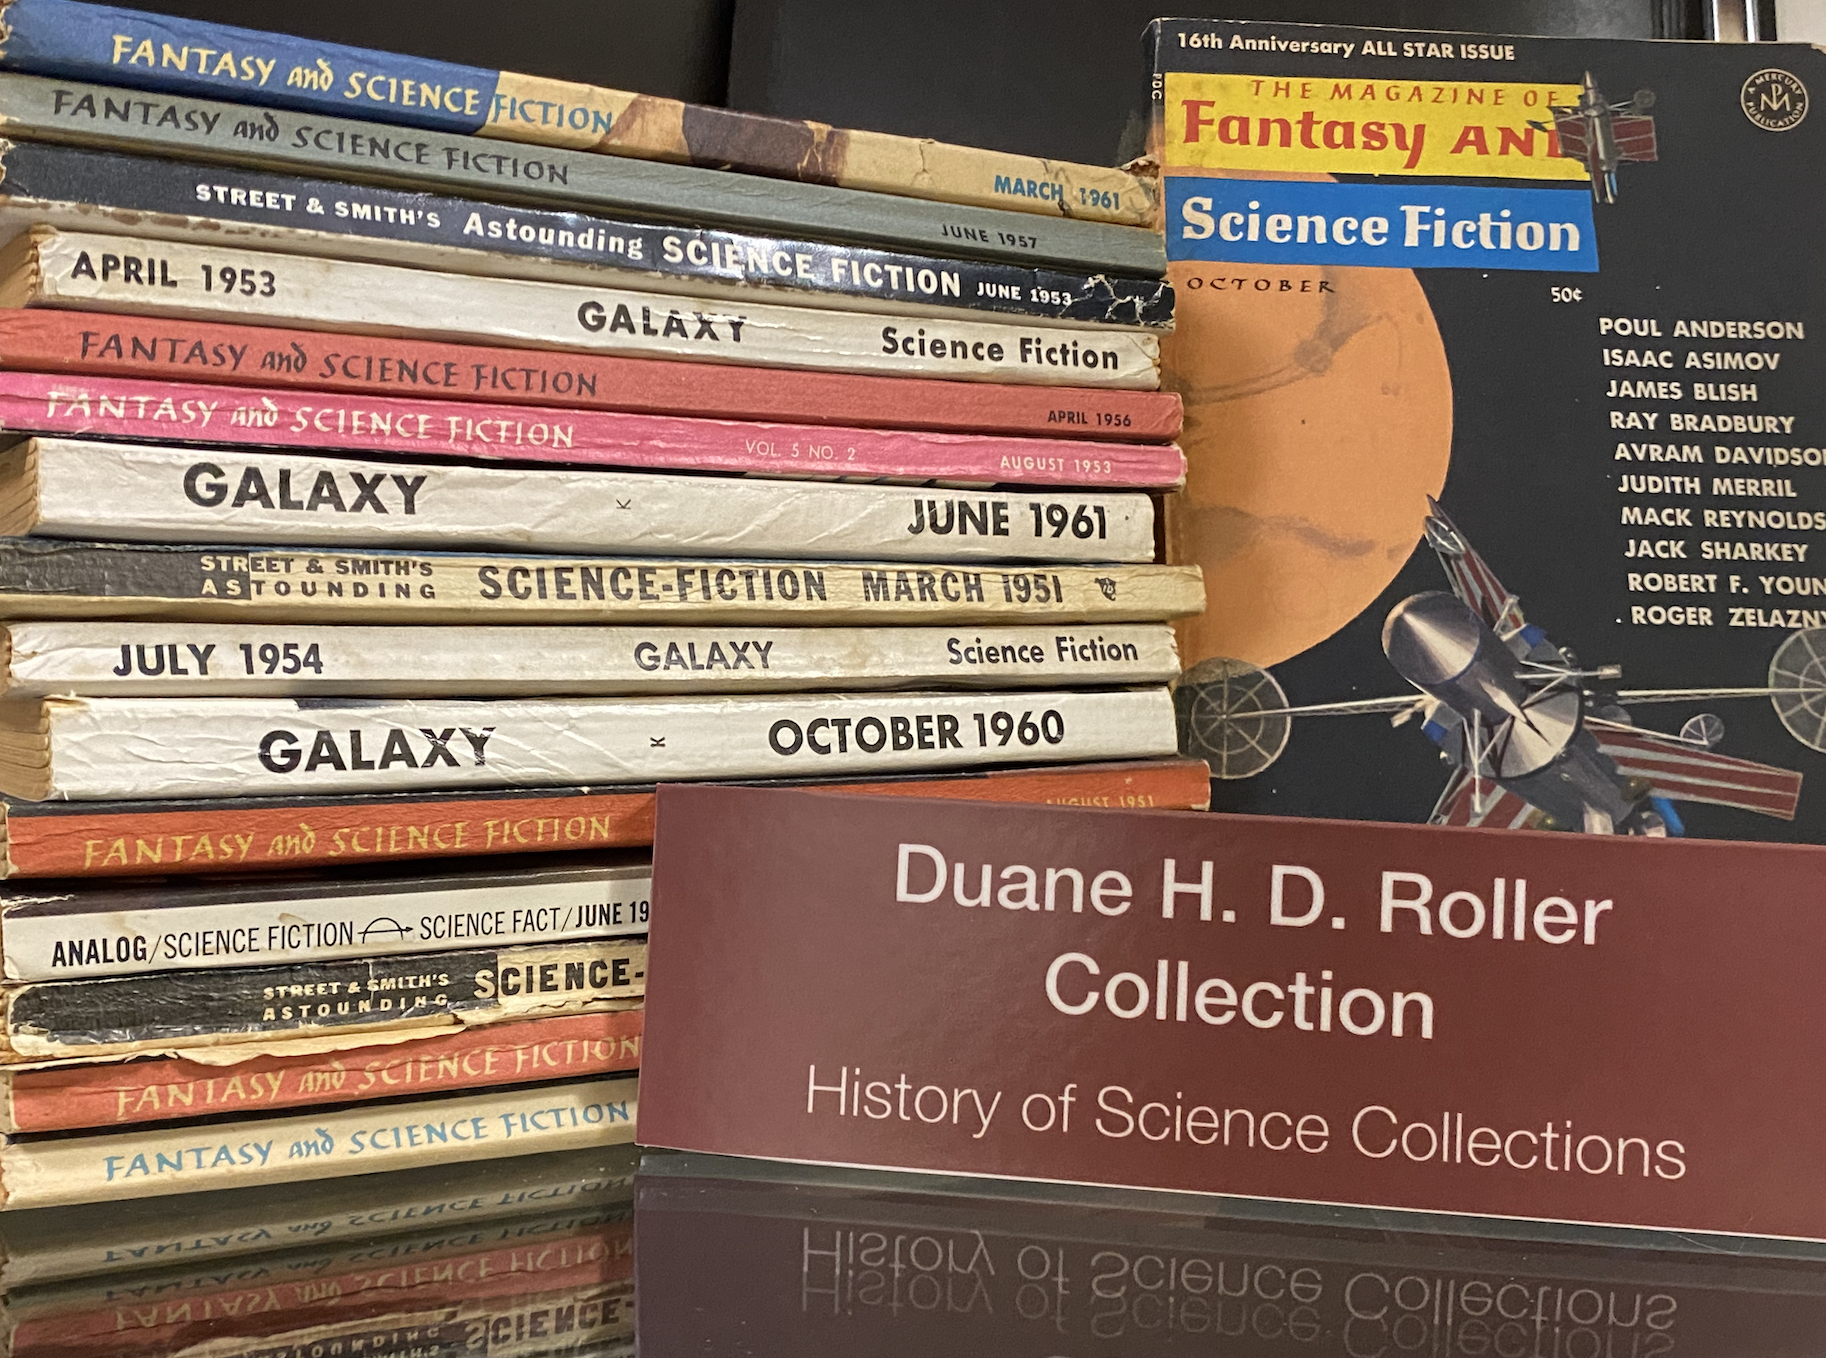 Photo of shelf with stack of pulp science fiction books, and one showing cover; sign says "Duane H. D. Roller Collection"